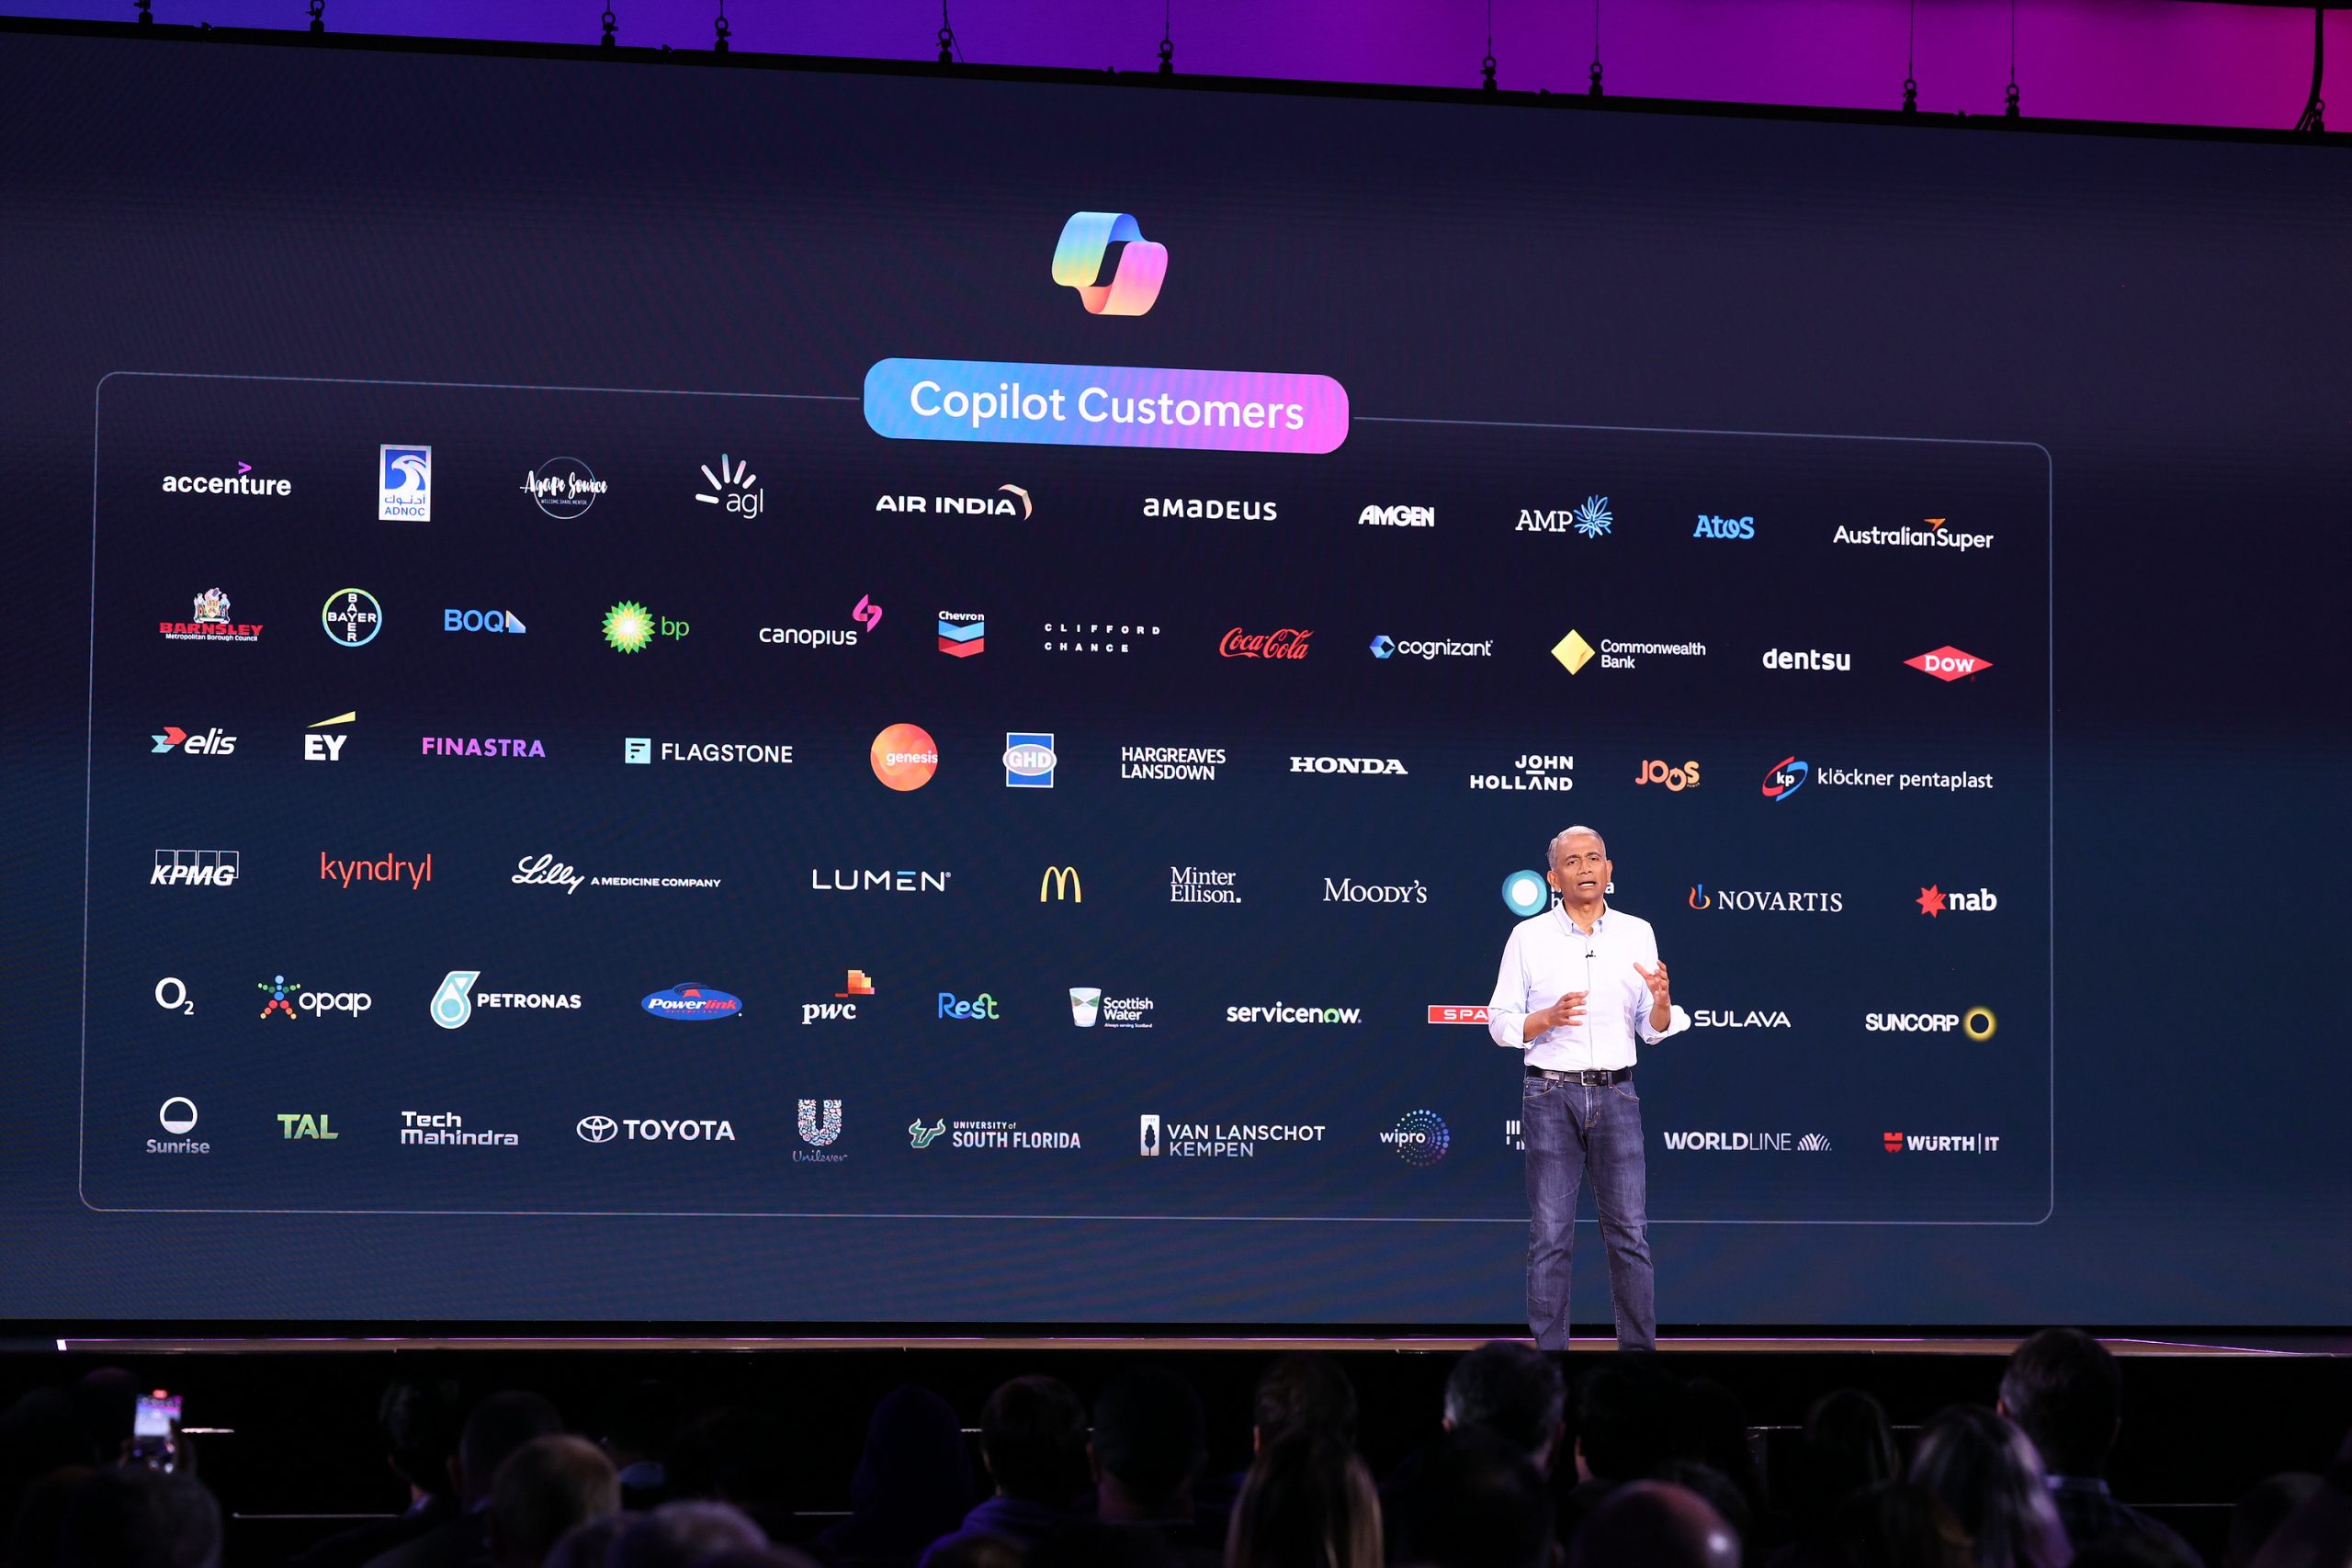 A man standing on stage with a list of Copilot customers on a screen behind him